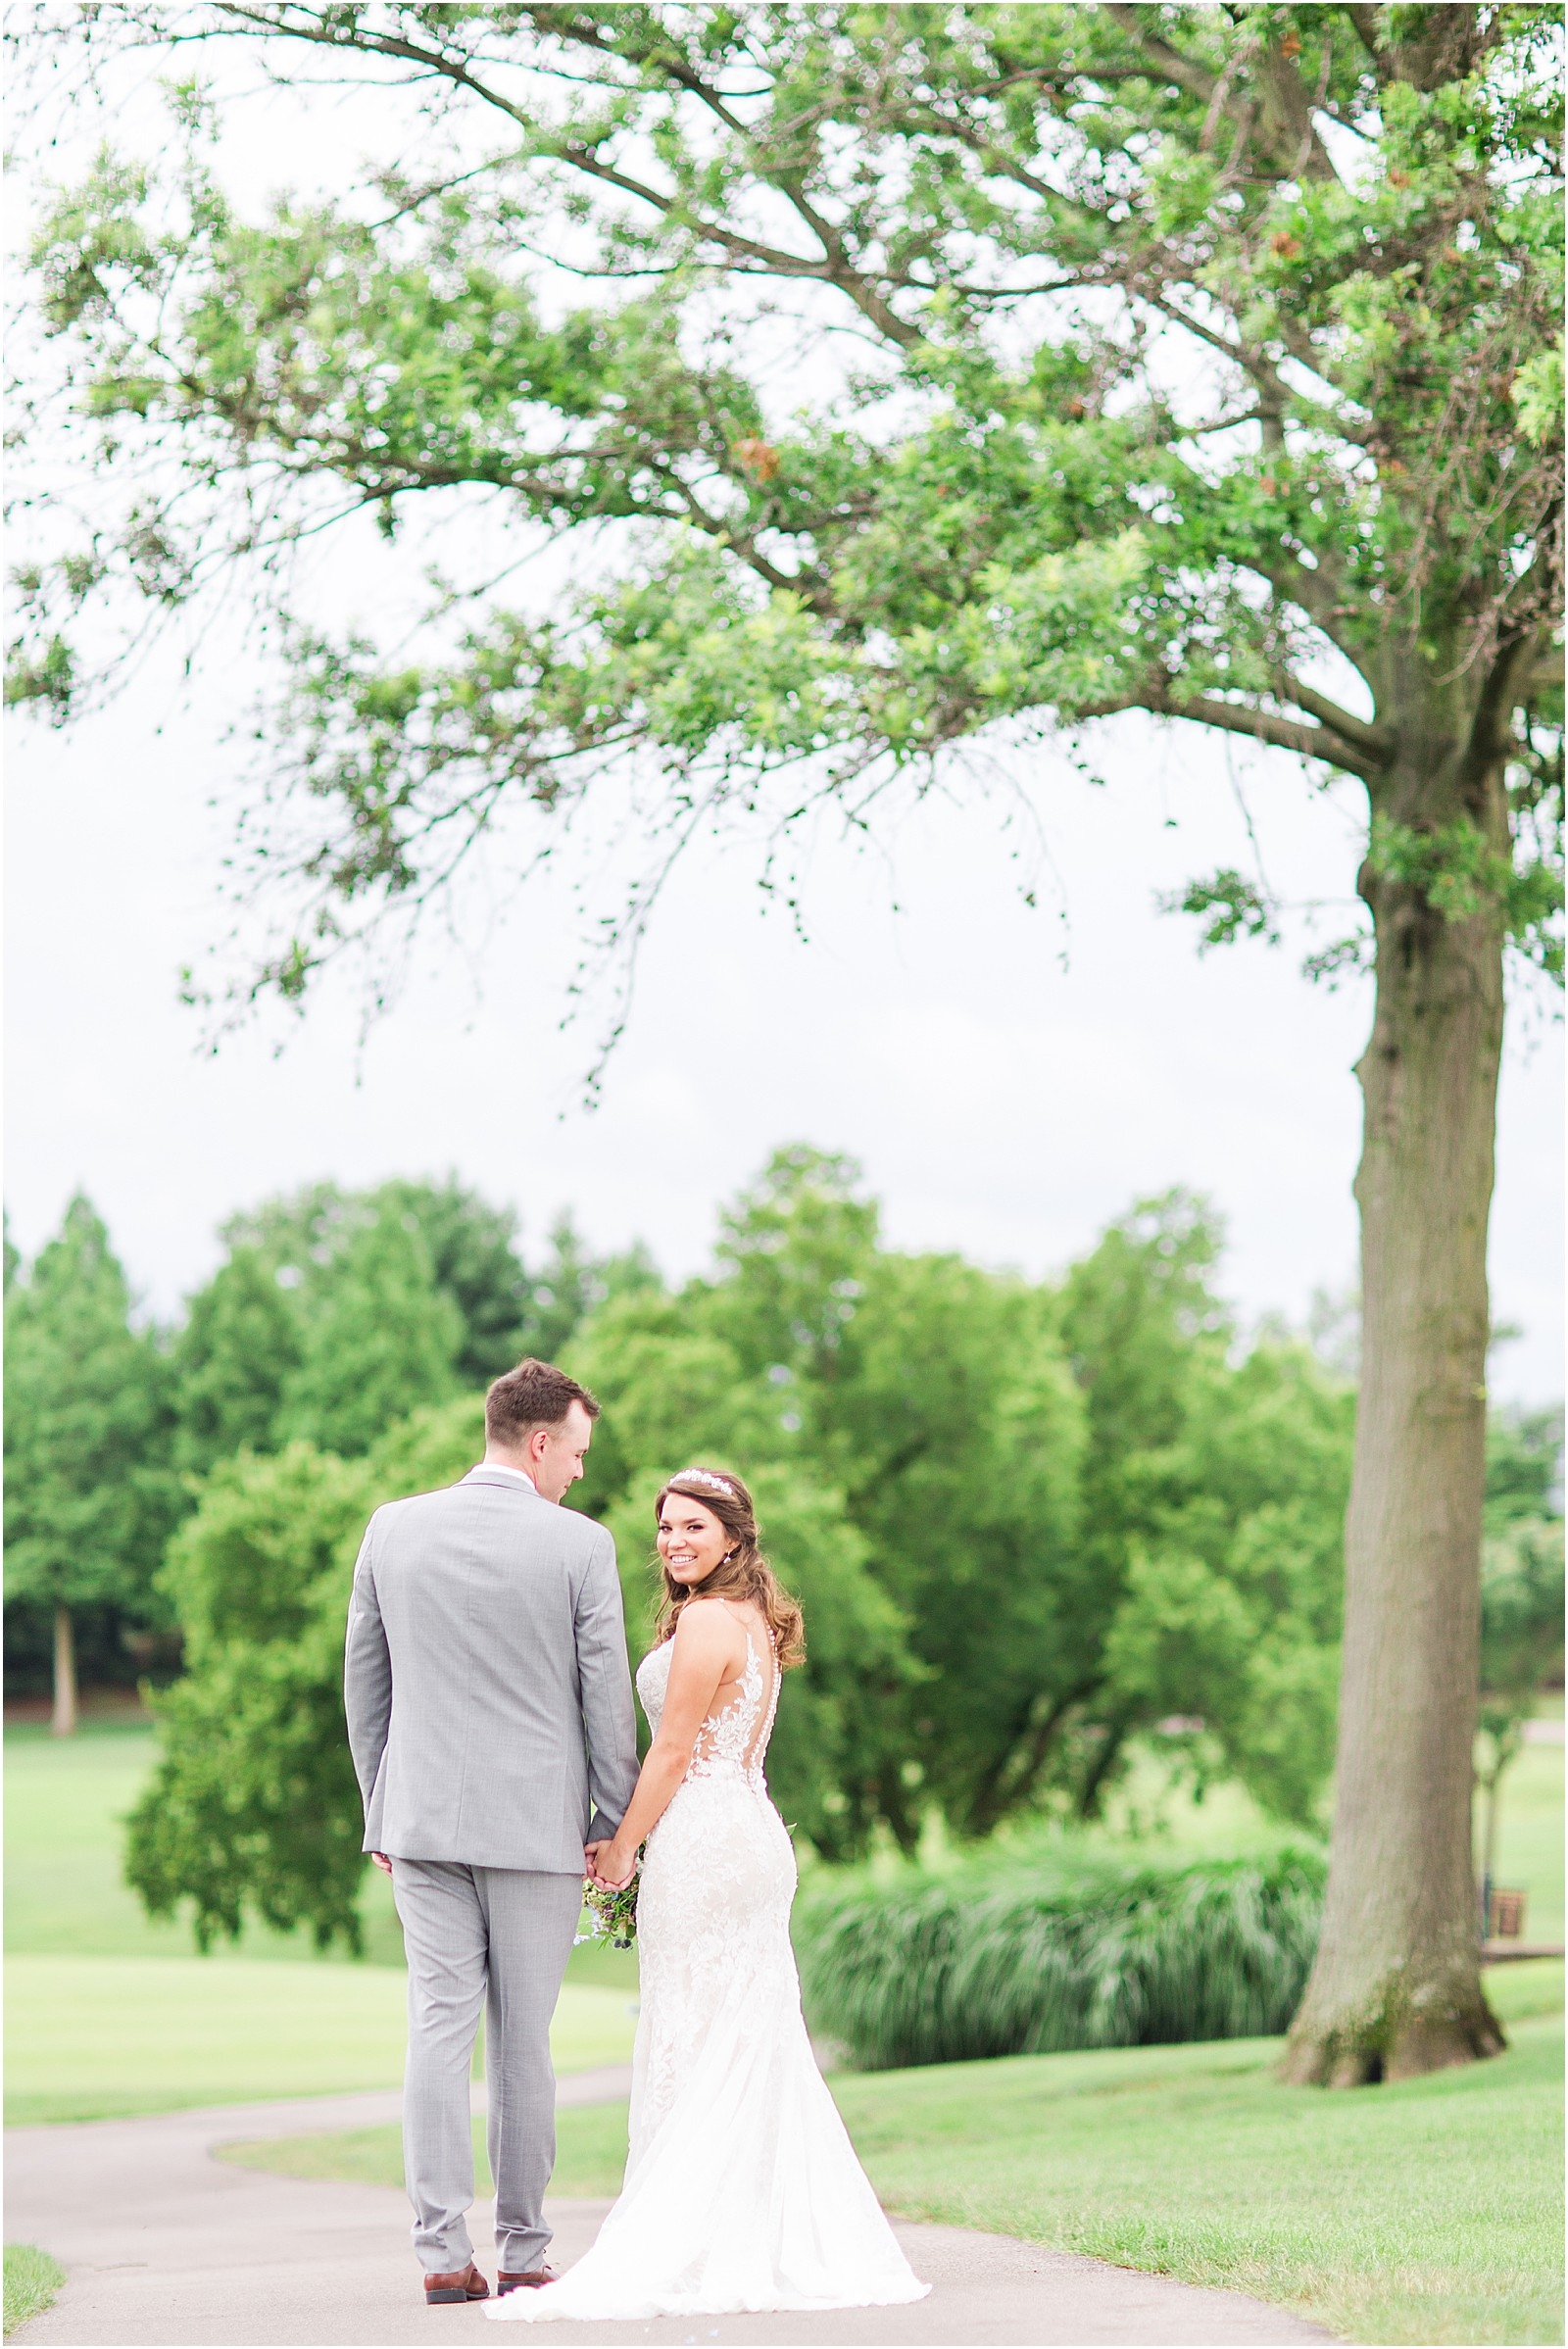 An Evansville County Club Wedding | Abby and Stratton 059.jpg